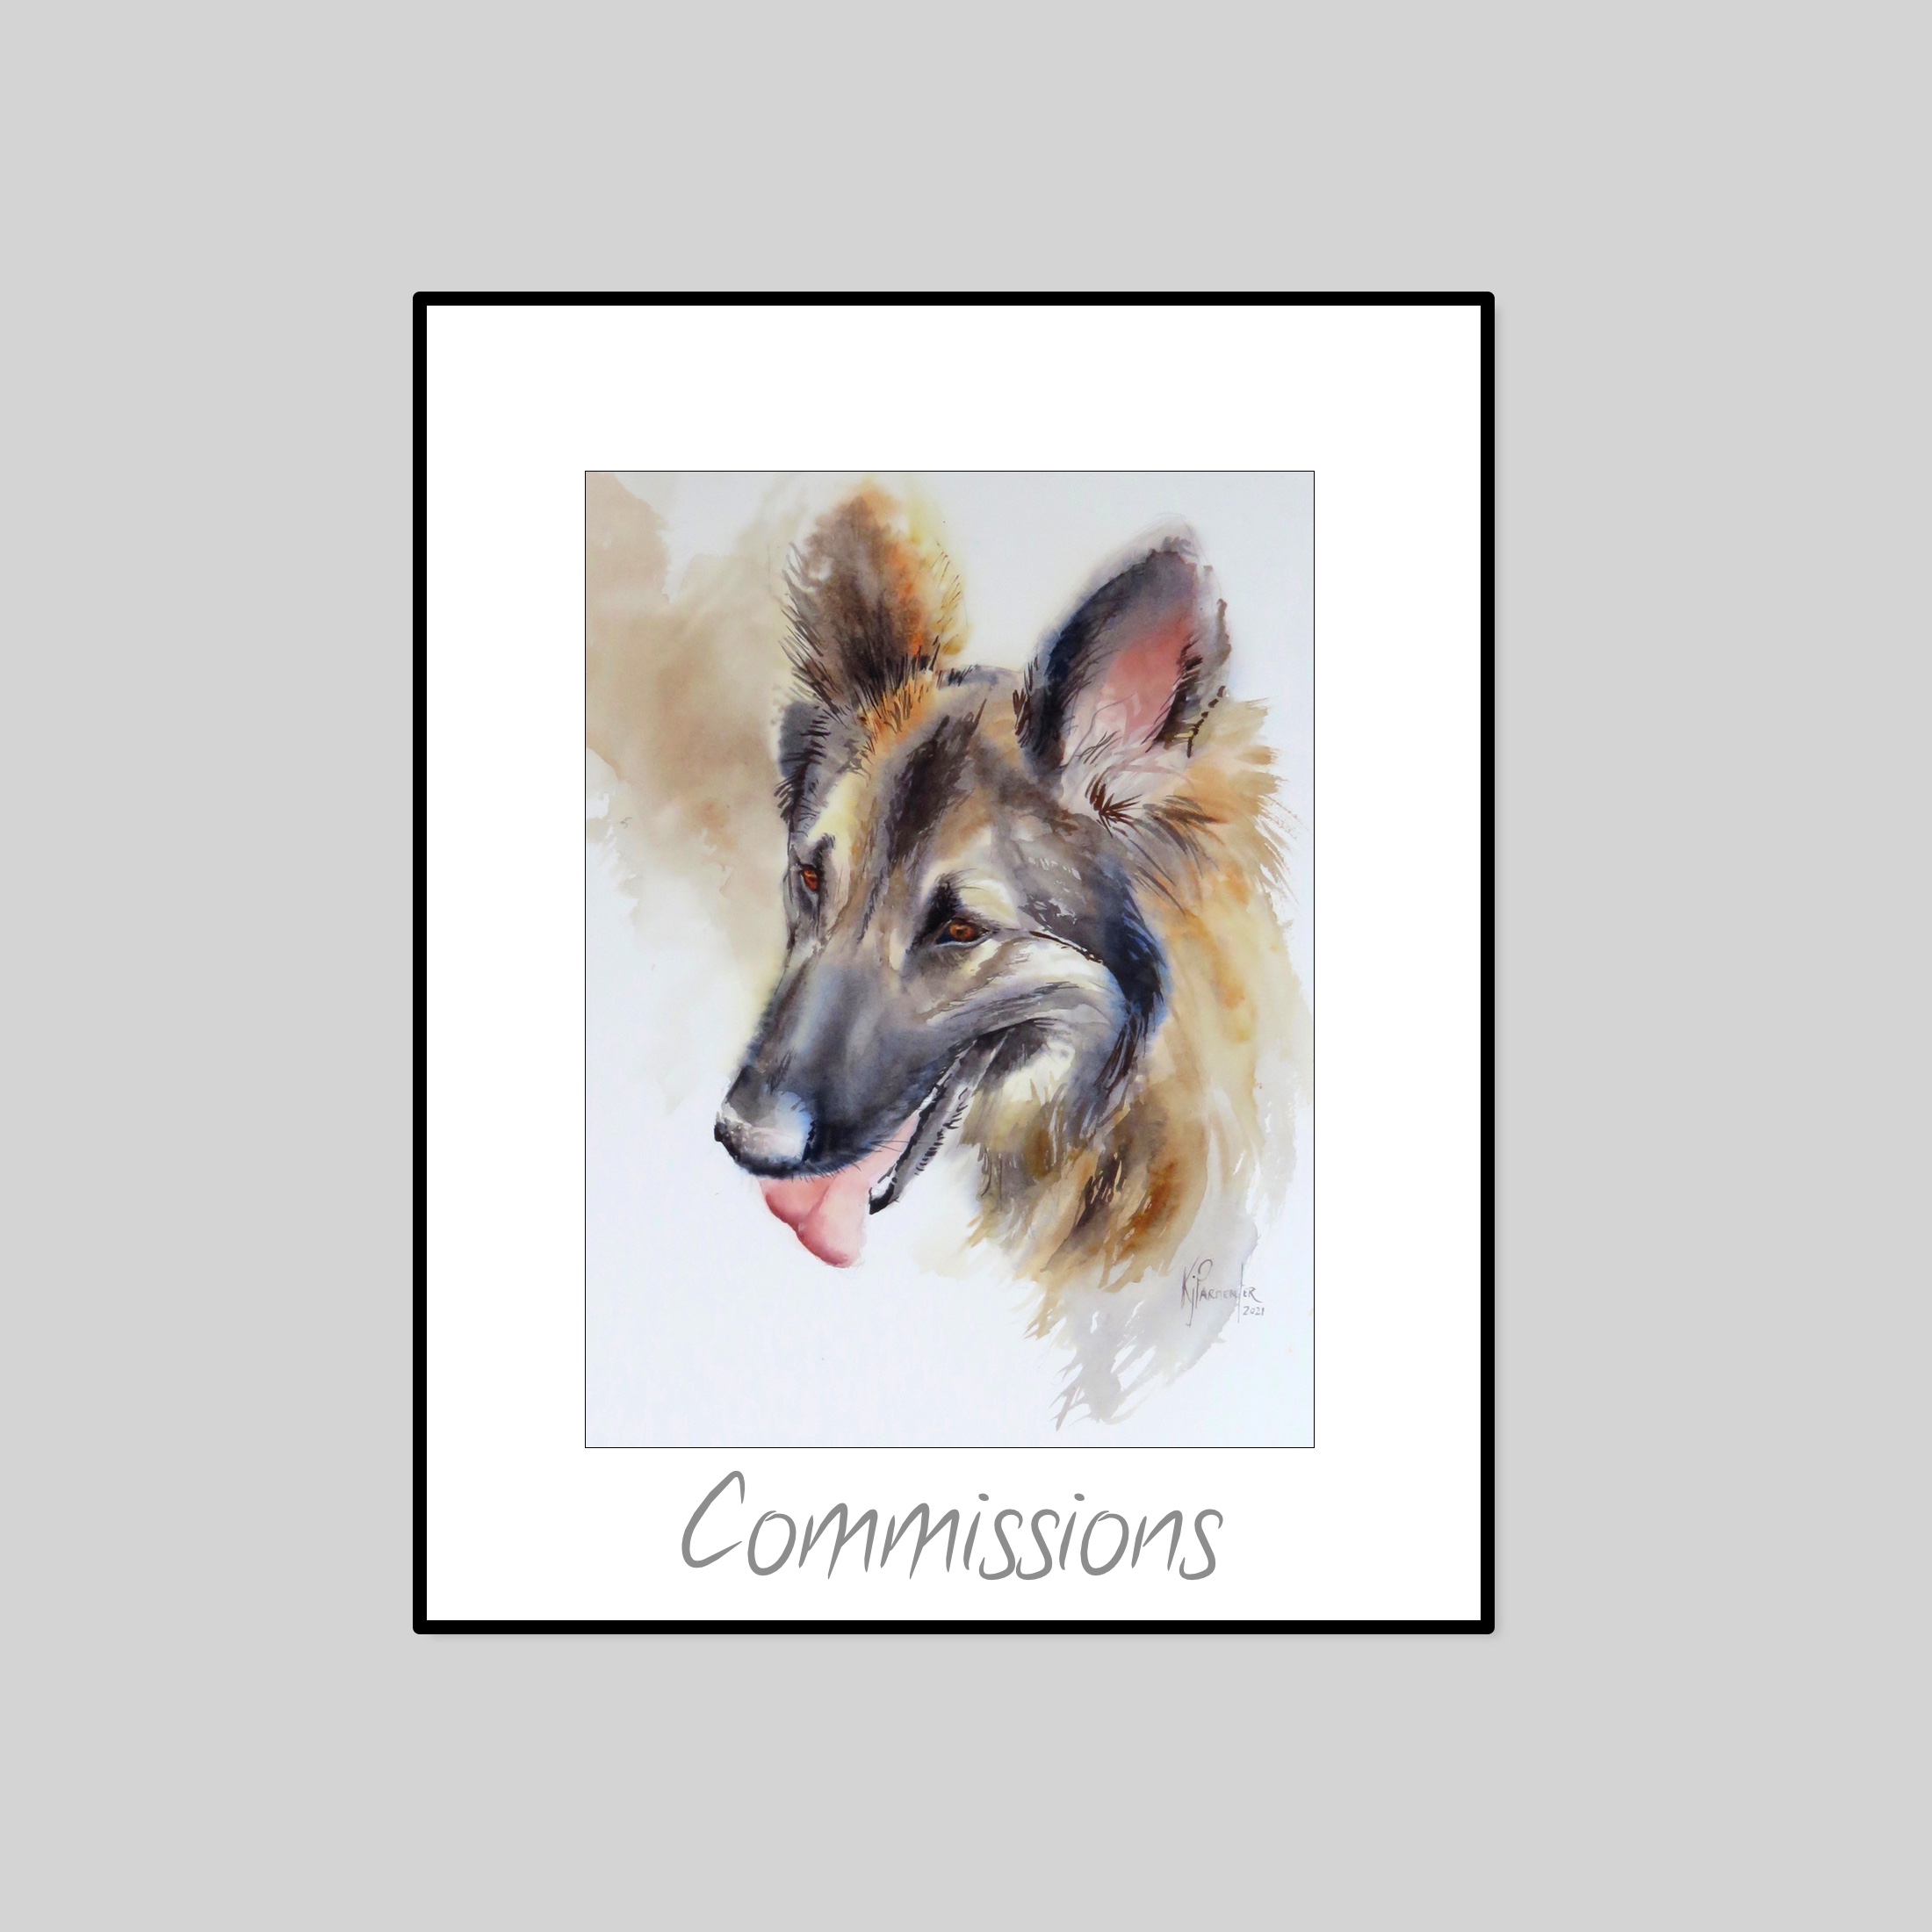 Commissions From Just £85